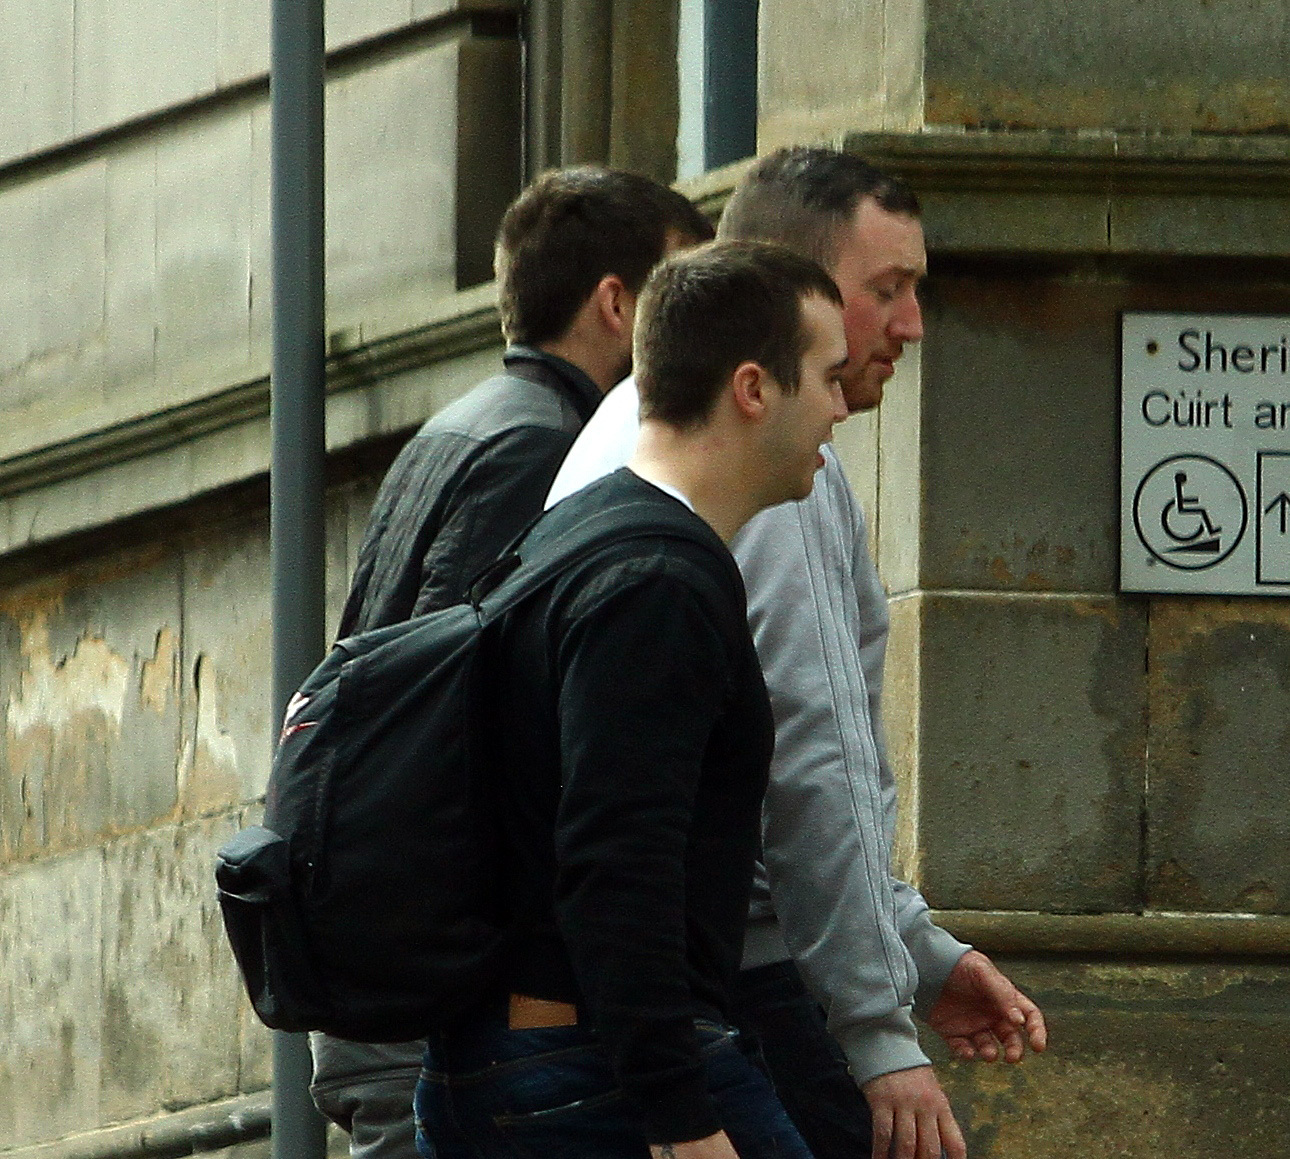 Damian McAuley (right) arriving at Oban Sheriff Court today, where he was sentenced to 10 months in jail